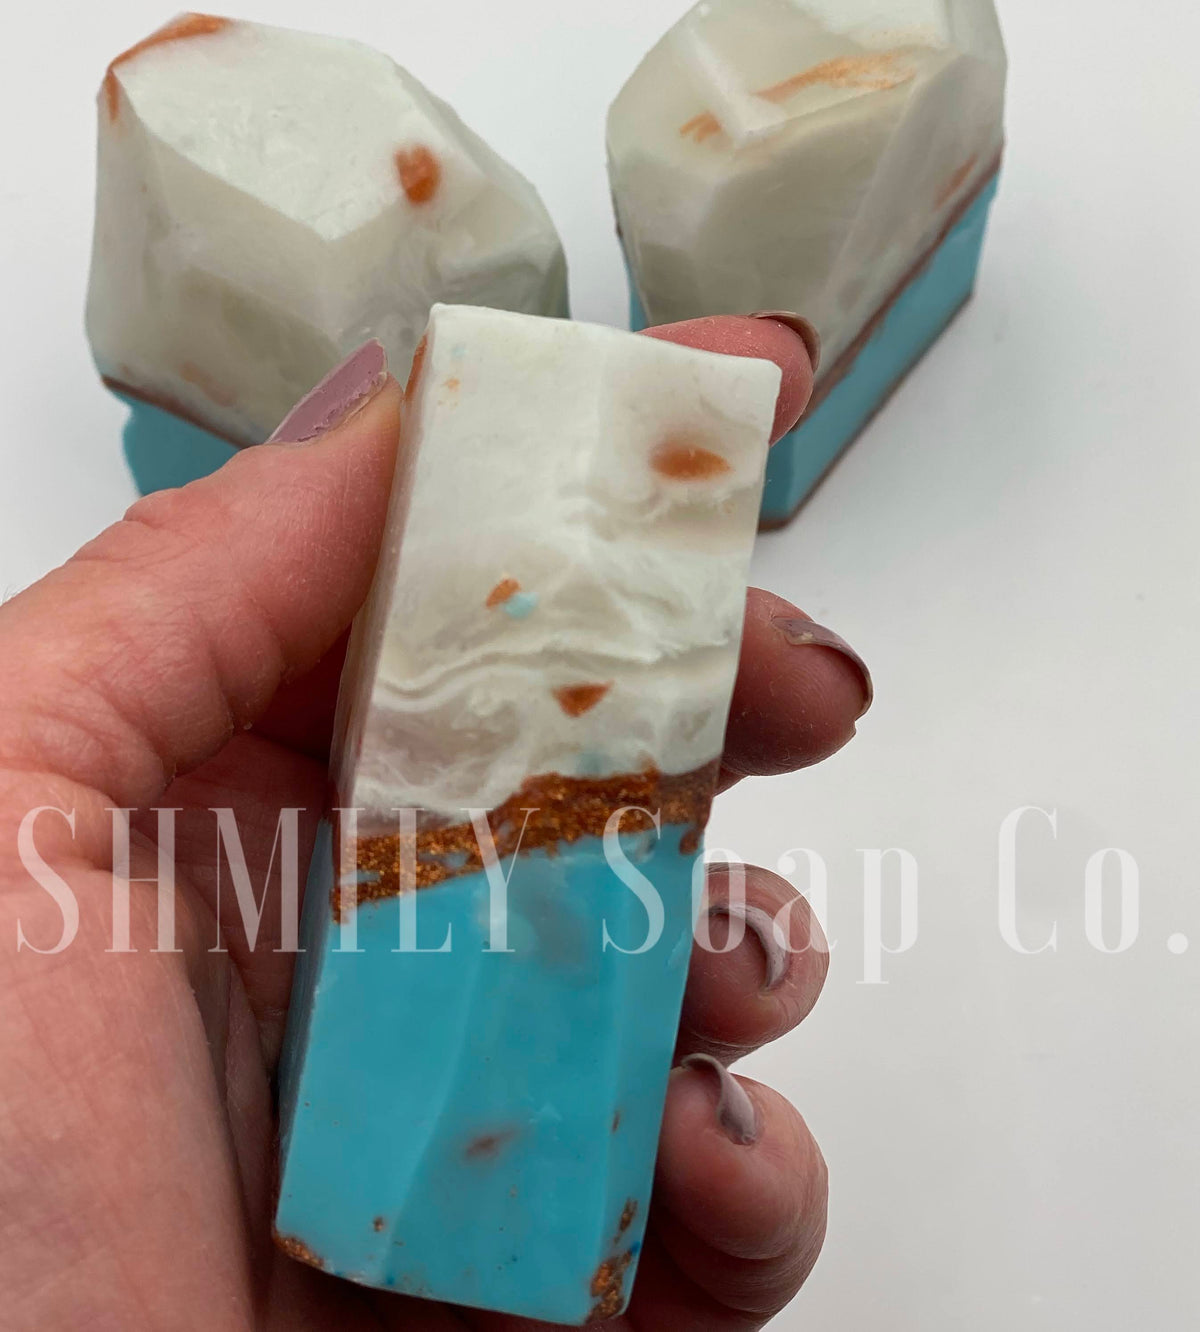 TURQUOISE CRYSTAL GLYCERIN SOAP